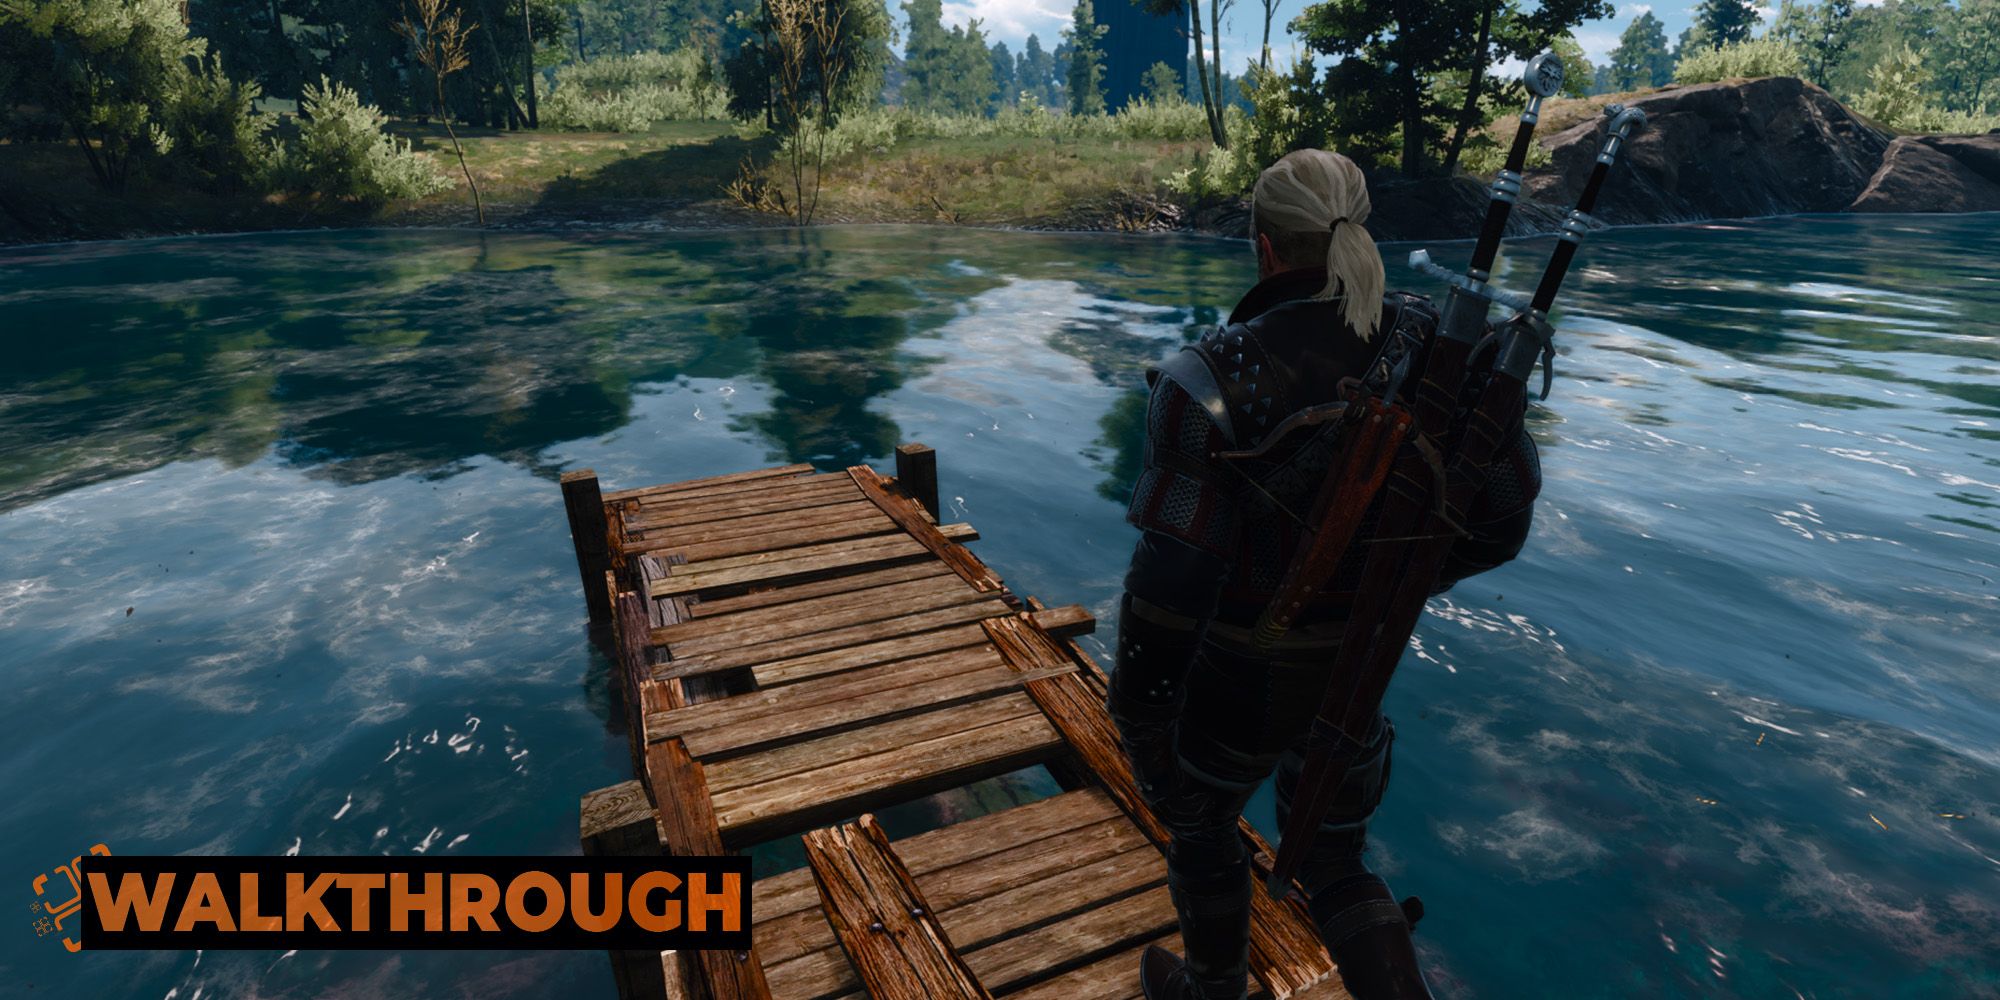 Geralt walks down a rickety pier by a body of water during the day in the countryside.